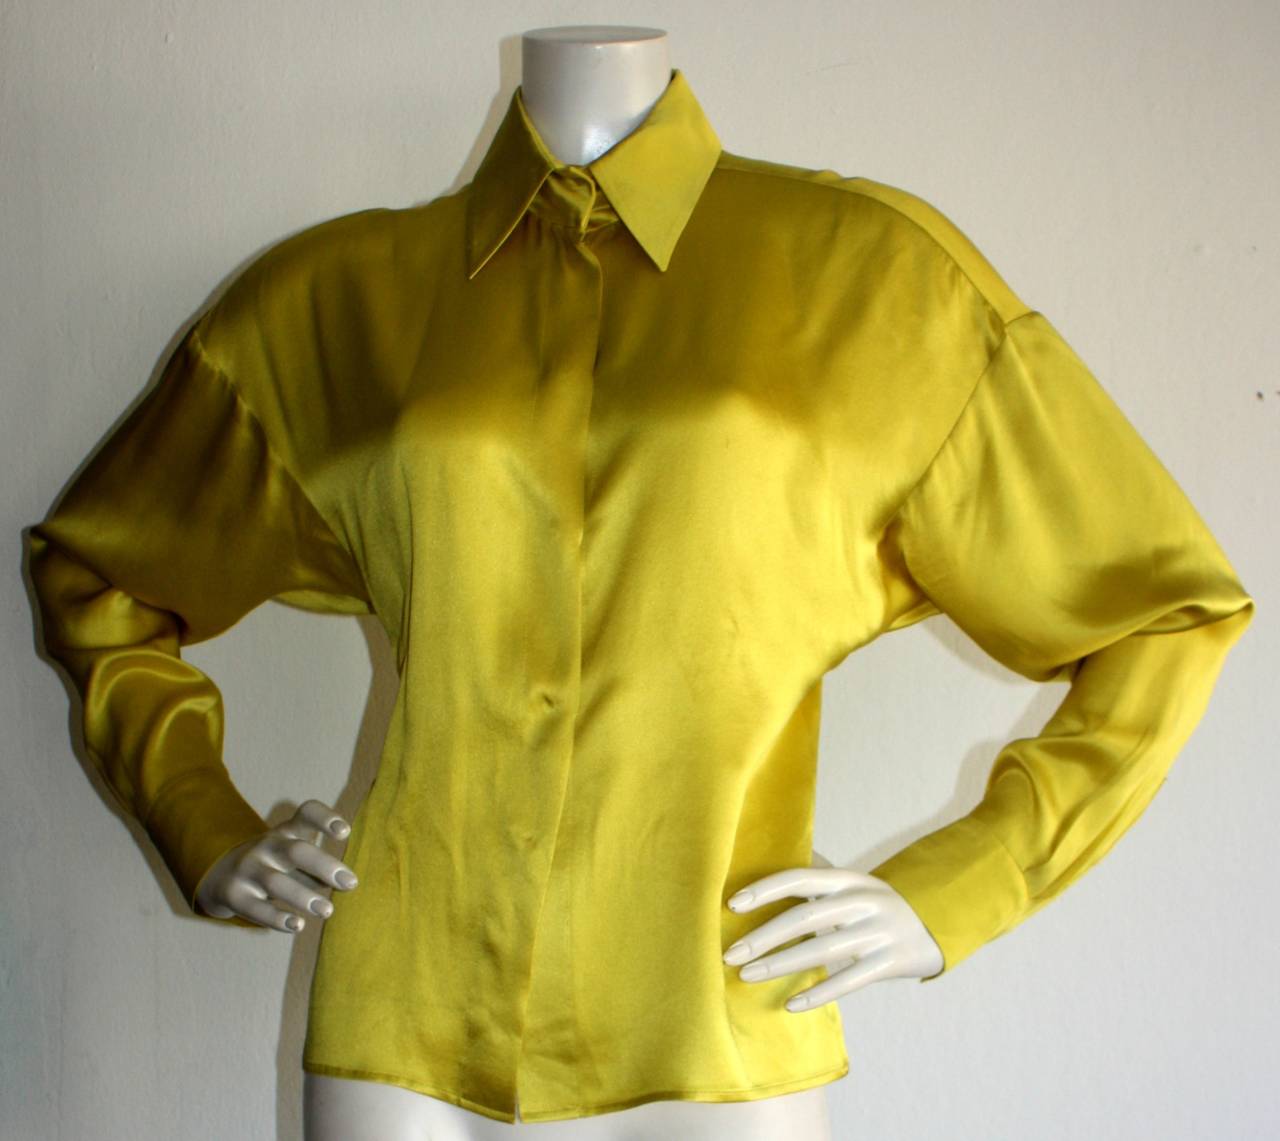 Gorgeous vintage YSL Rive Gauche chartreuse silk blouse! Hidden snaps up the front, and at cuffs. In great condition. Marked Size 38

Measurements:
42 inch bust
34 inch waist